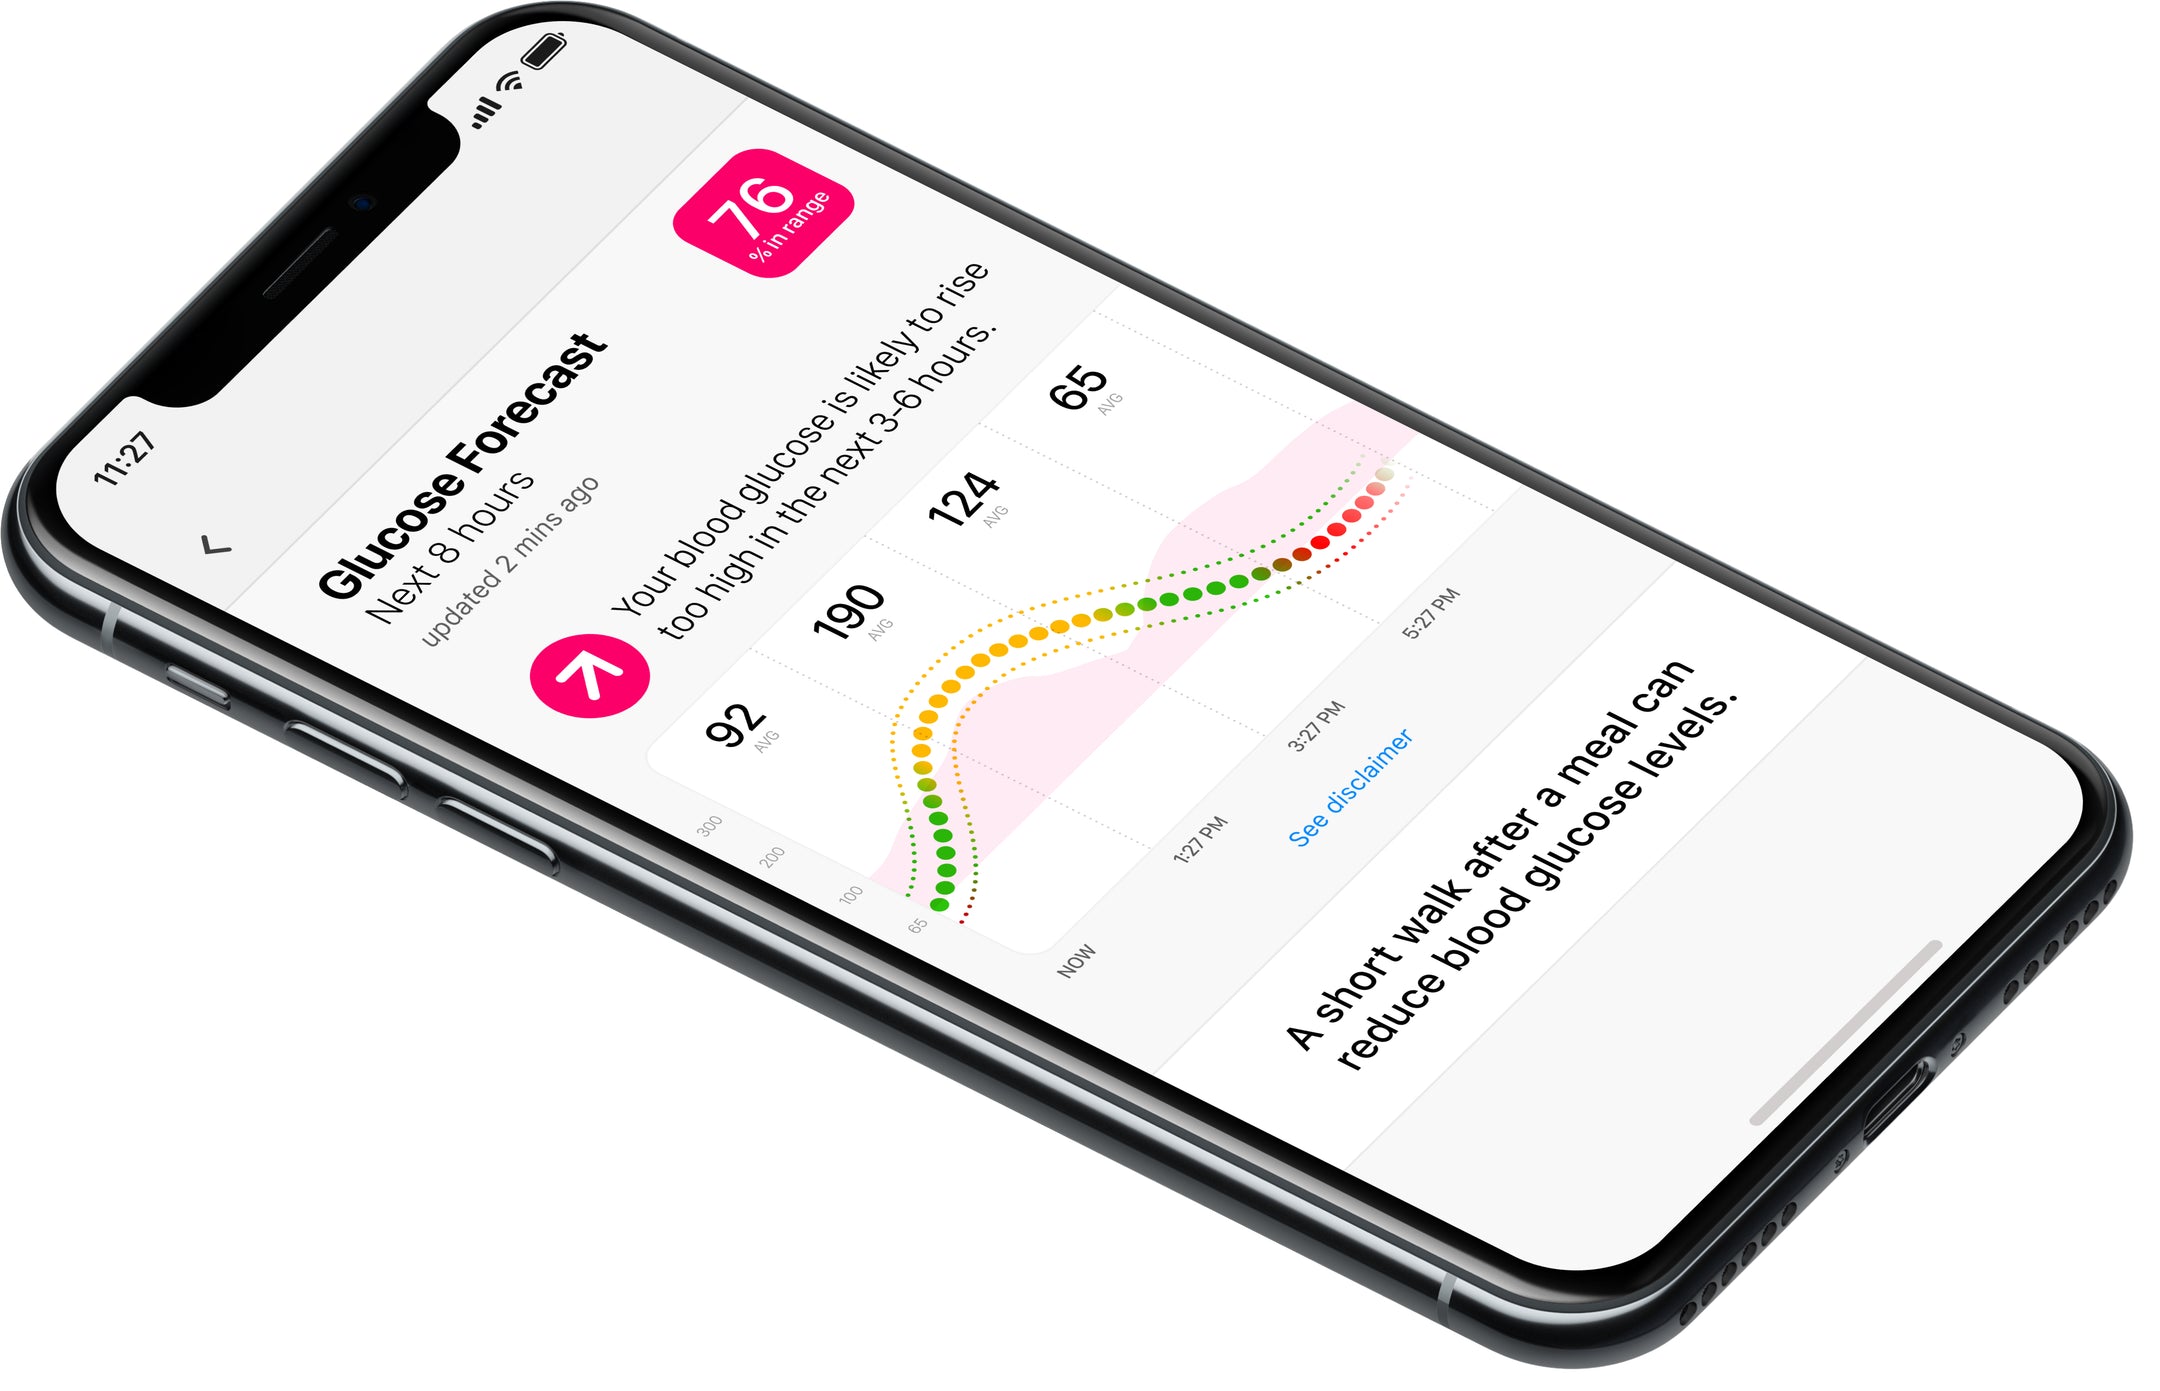 One Drop Announces Blood Glucose Predictive Capability for People Using Continuous Glucose Monitors